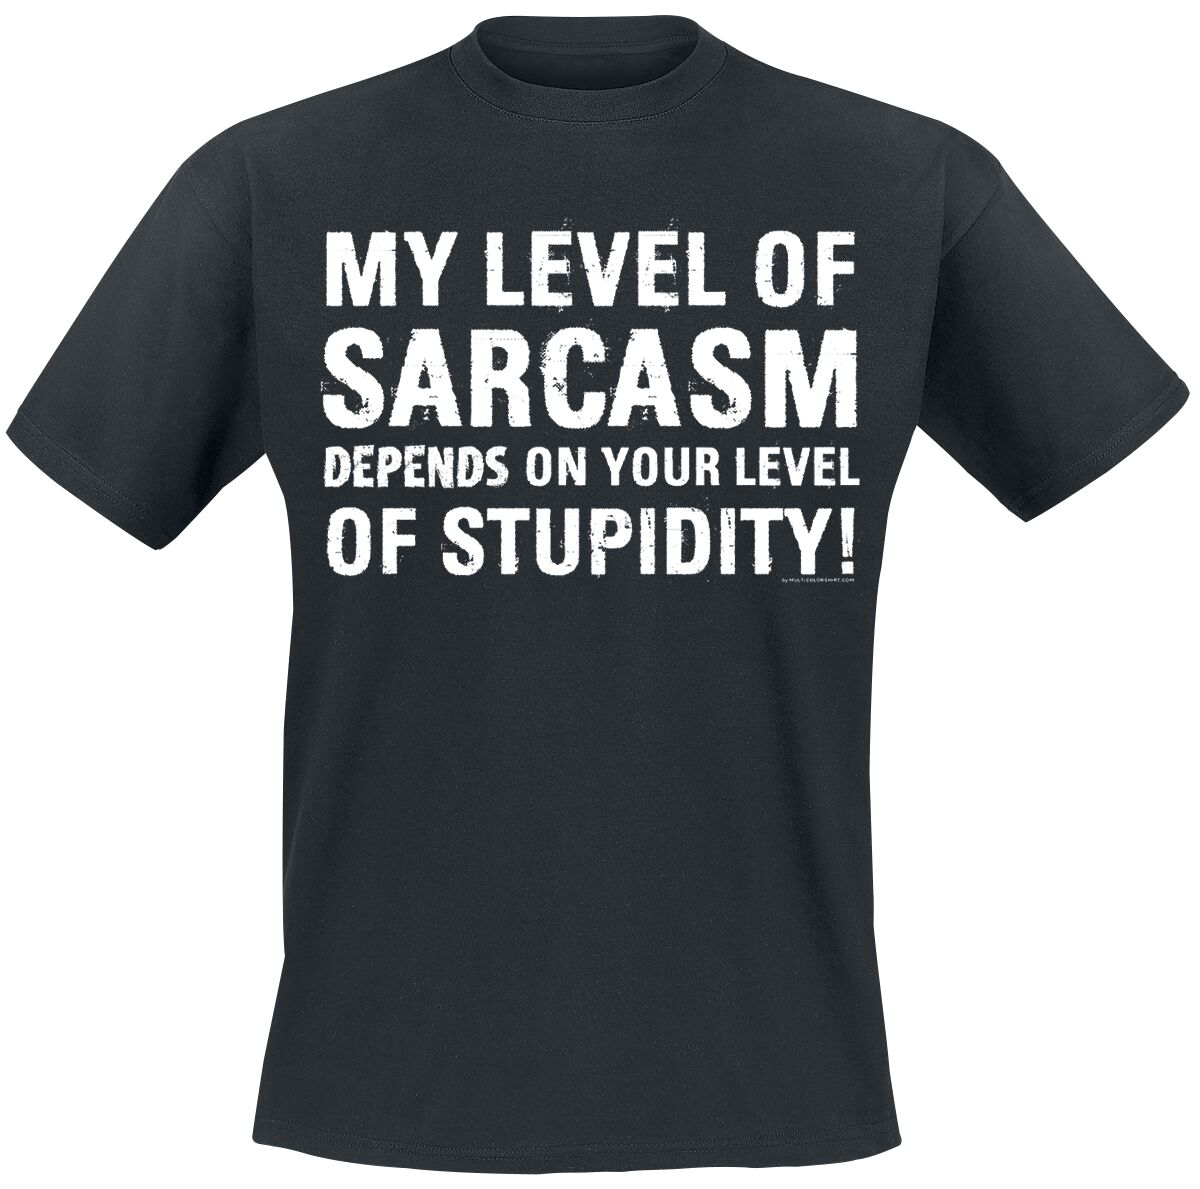 Sprüche My Level Of Sarcasm Depends On Your Level Of Stupidity! T-Shirt schwarz in M